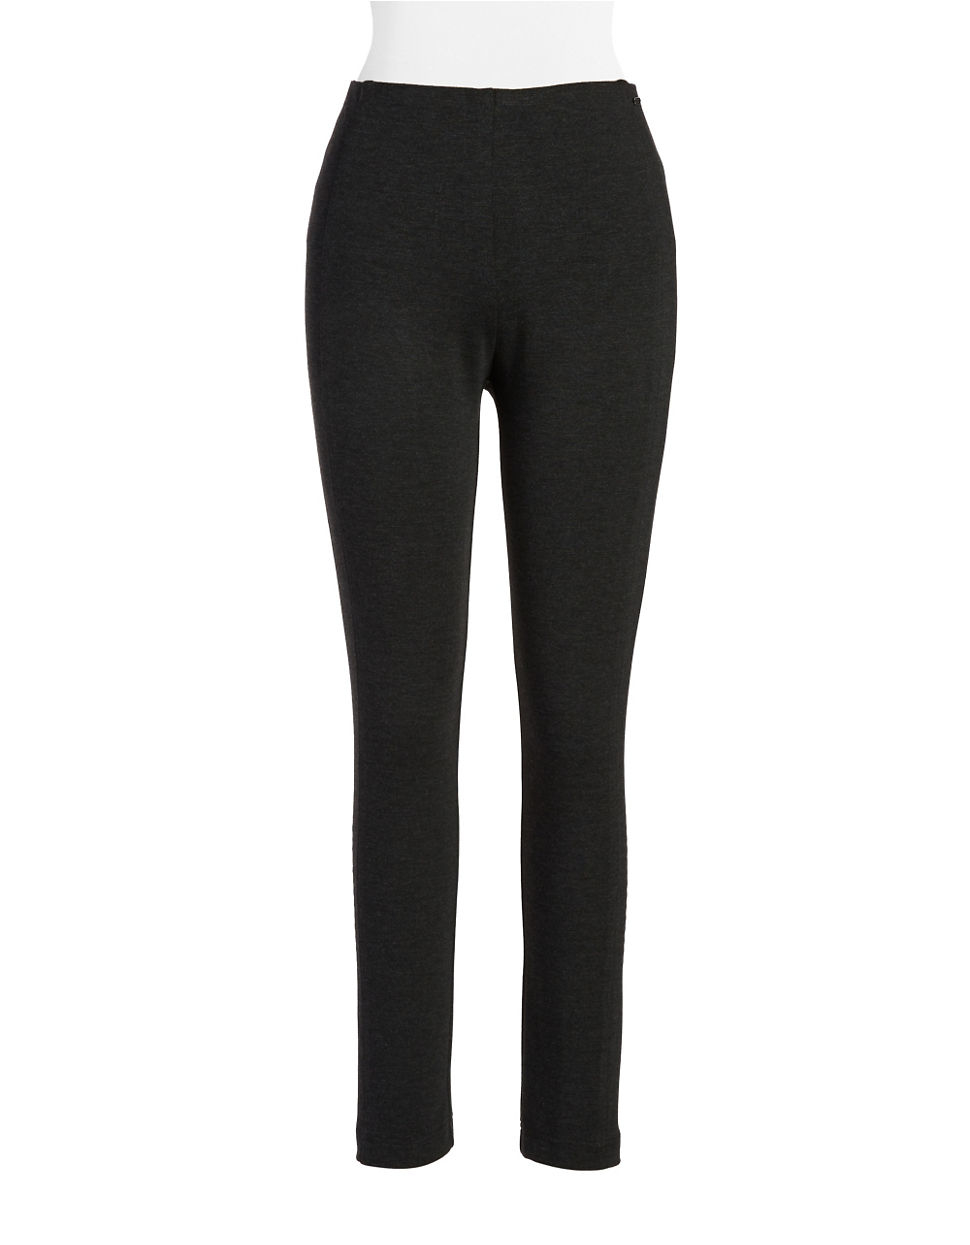 Ivanka trump Compression Stretch Leggings in Gray (Charcoal) | Lyst